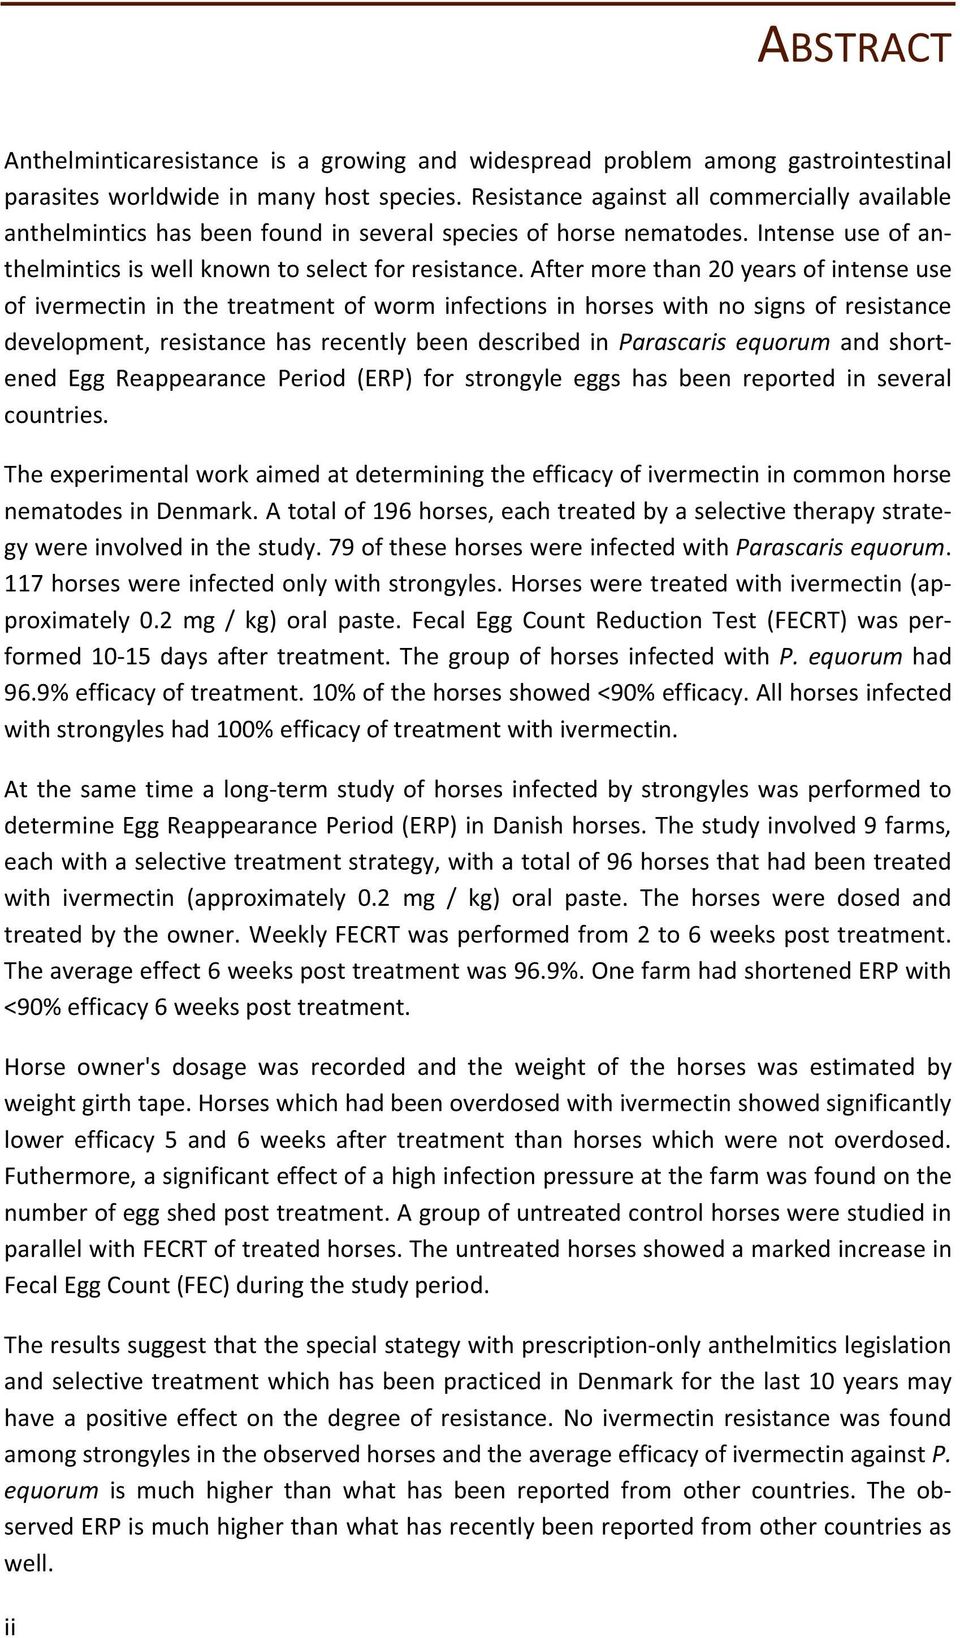 aftermorethan20yearsofintenseuse ofivermectininthetreatmentofworminfectionsinhorseswithnosignsofresistance development, resistance has recently been described in Parascaris equorum and short ened Egg